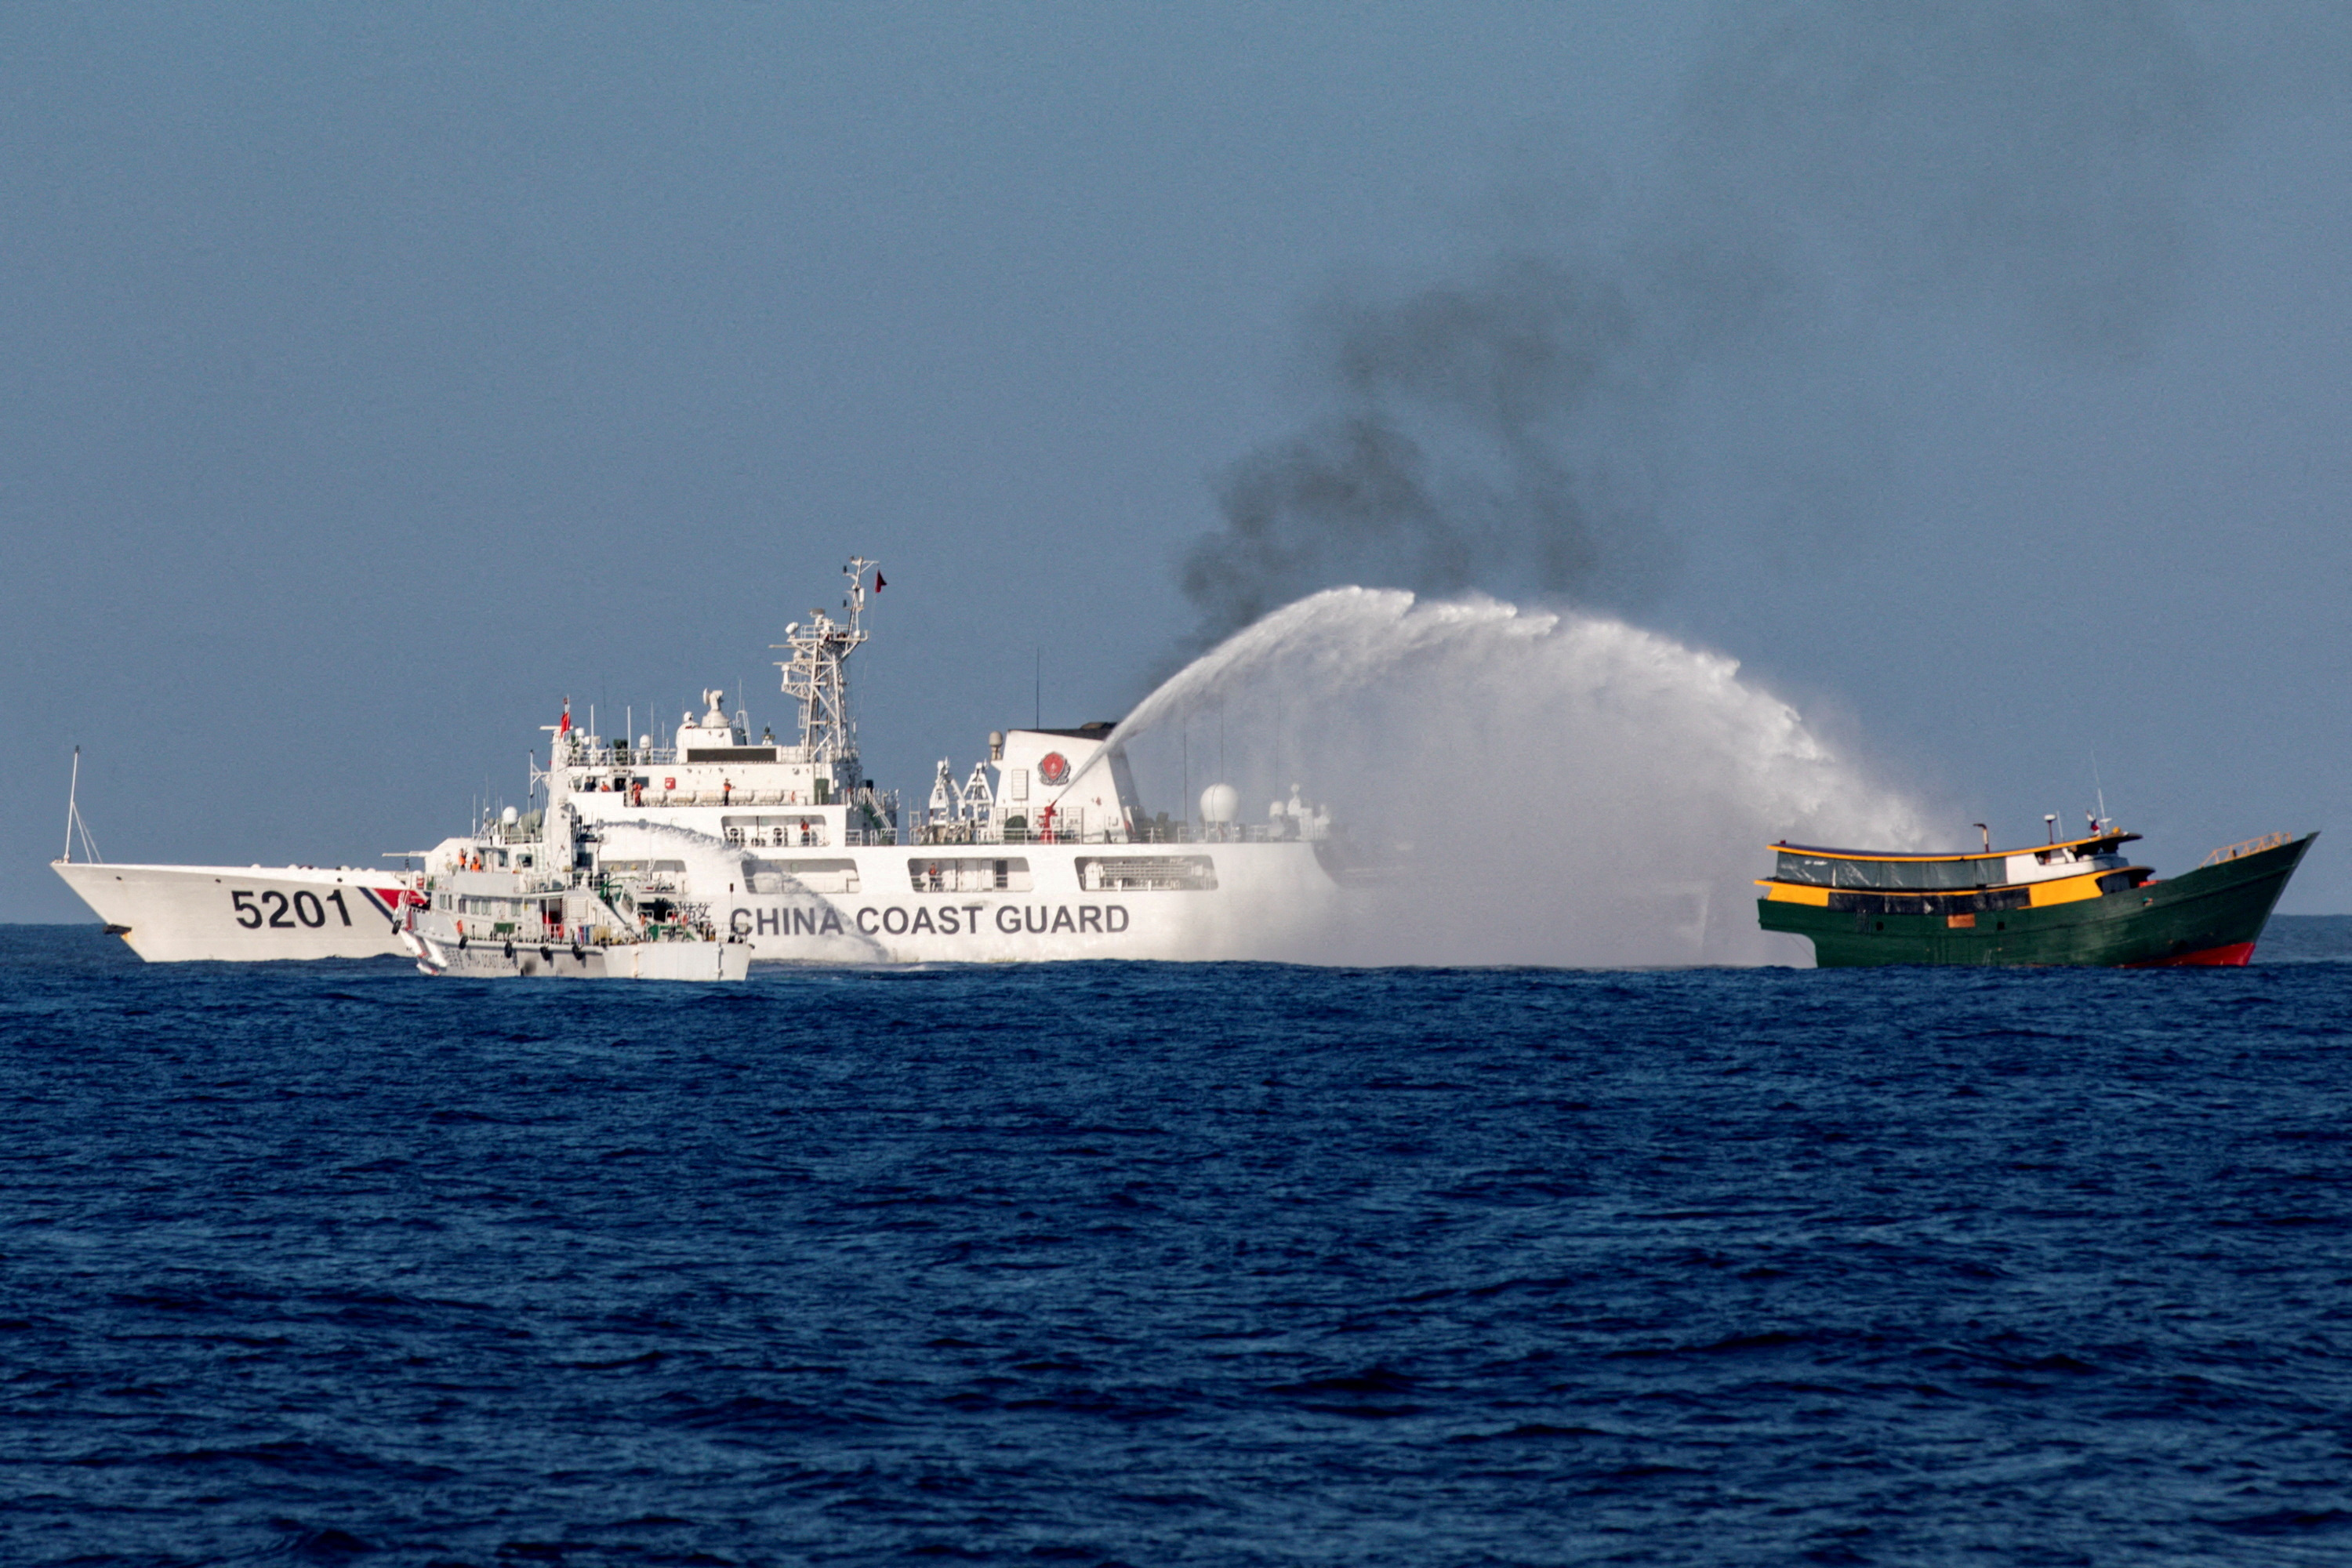 Chinese Coast Guard vessels fire water cannons towards a Philippine resupply vessel Unaizah May 4 on its way to a resupply mission at Second Thomas Shoal in the South China Sea